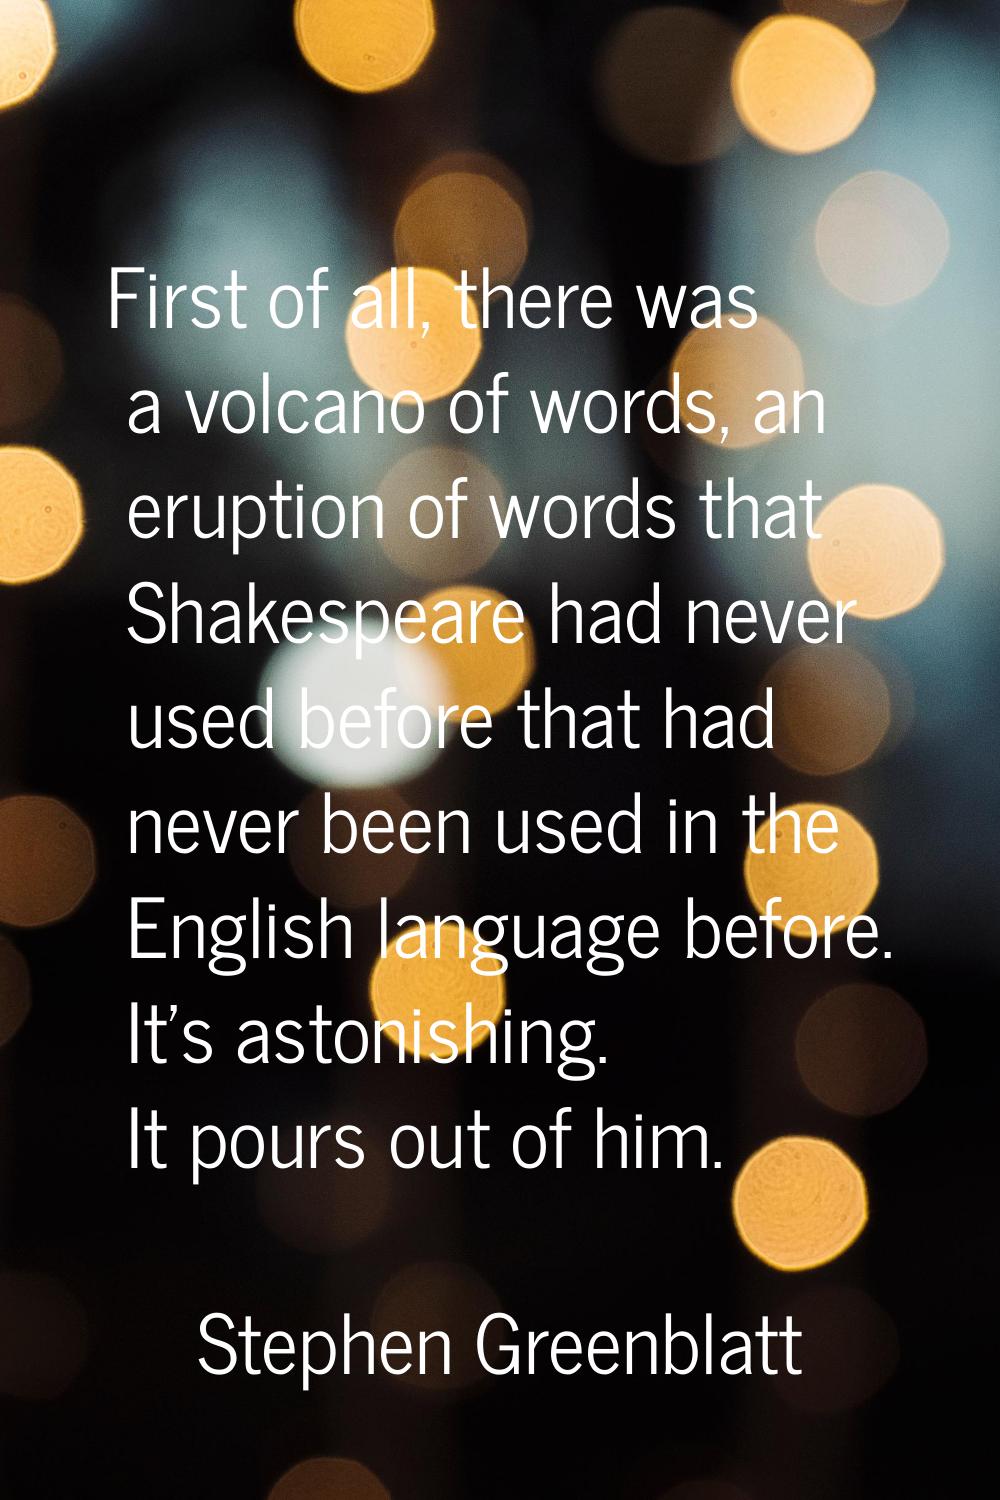 First of all, there was a volcano of words, an eruption of words that Shakespeare had never used be